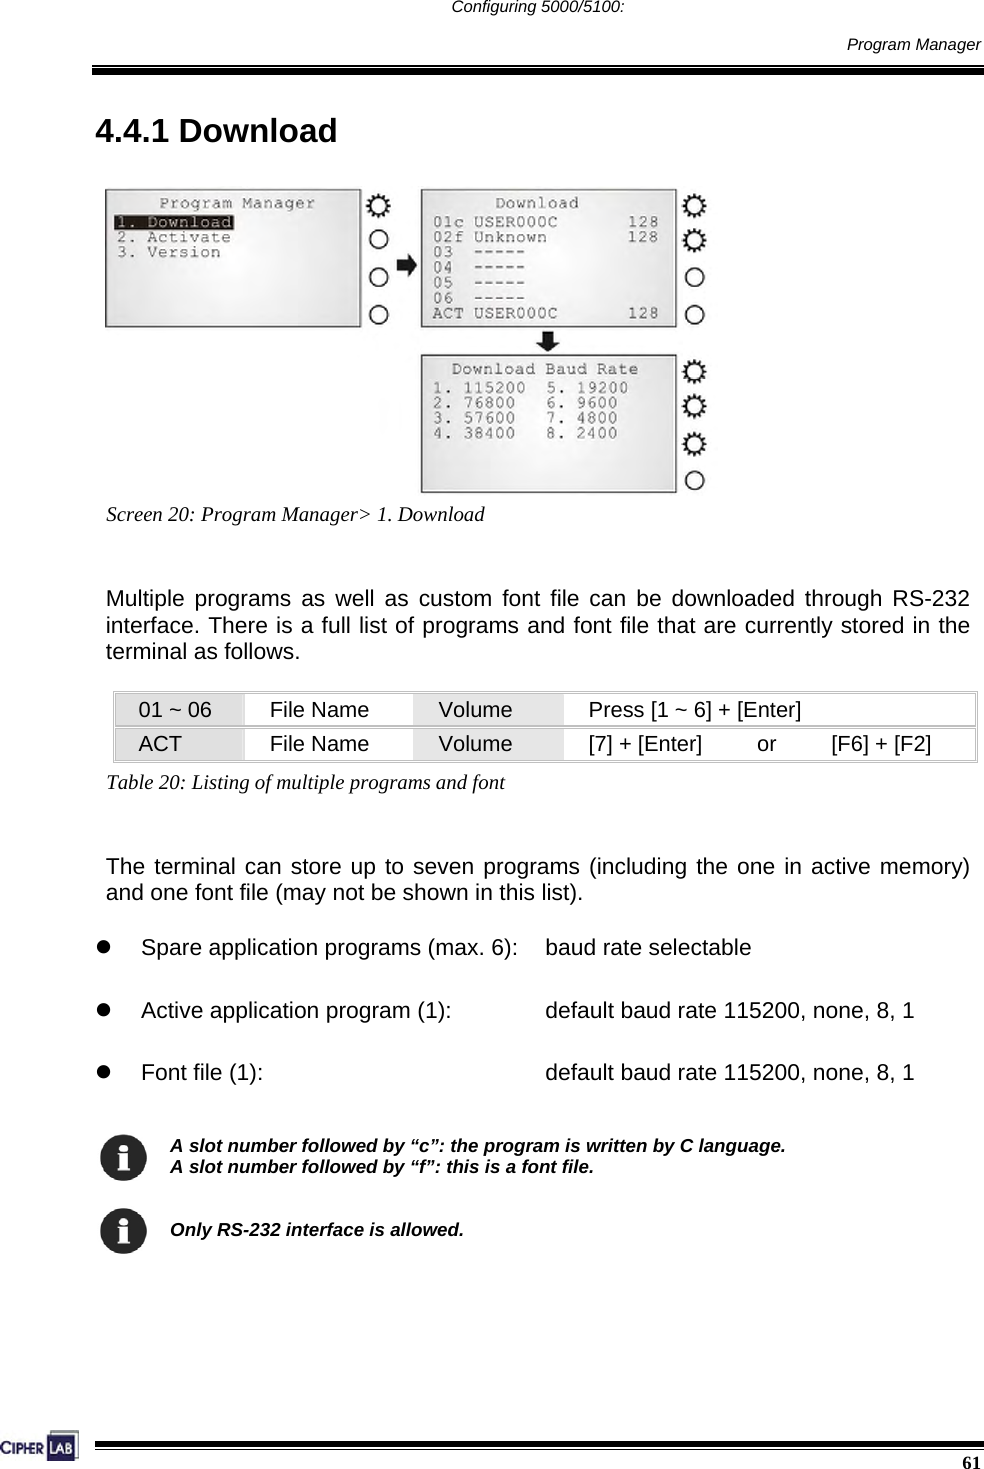  61  Configuring 5000/5100:     Program Manager 4.4.1 Download  Screen 20: Program Manager&gt; 1. Download   Multiple programs as well as custom font file can be downloaded through RS-232 interface. There is a full list of programs and font file that are currently stored in the terminal as follows.    01 ~ 06 File Name  Volume  Press [1 ~ 6] + [Enter] ACT File Name  Volume  [7] + [Enter]     or     [F6] + [F2] Table 20: Listing of multiple programs and font   The terminal can store up to seven programs (including the one in active memory) and one font file (may not be shown in this list).    z  Spare application programs (max. 6):    baud rate selectable  z  Active application program (1):    default baud rate 115200, none, 8, 1  z  Font file (1):            default baud rate 115200, none, 8, 1   A slot number followed by “c”: the program is written by C language. A slot number followed by “f”: this is a font file.    Only RS-232 interface is allowed.     